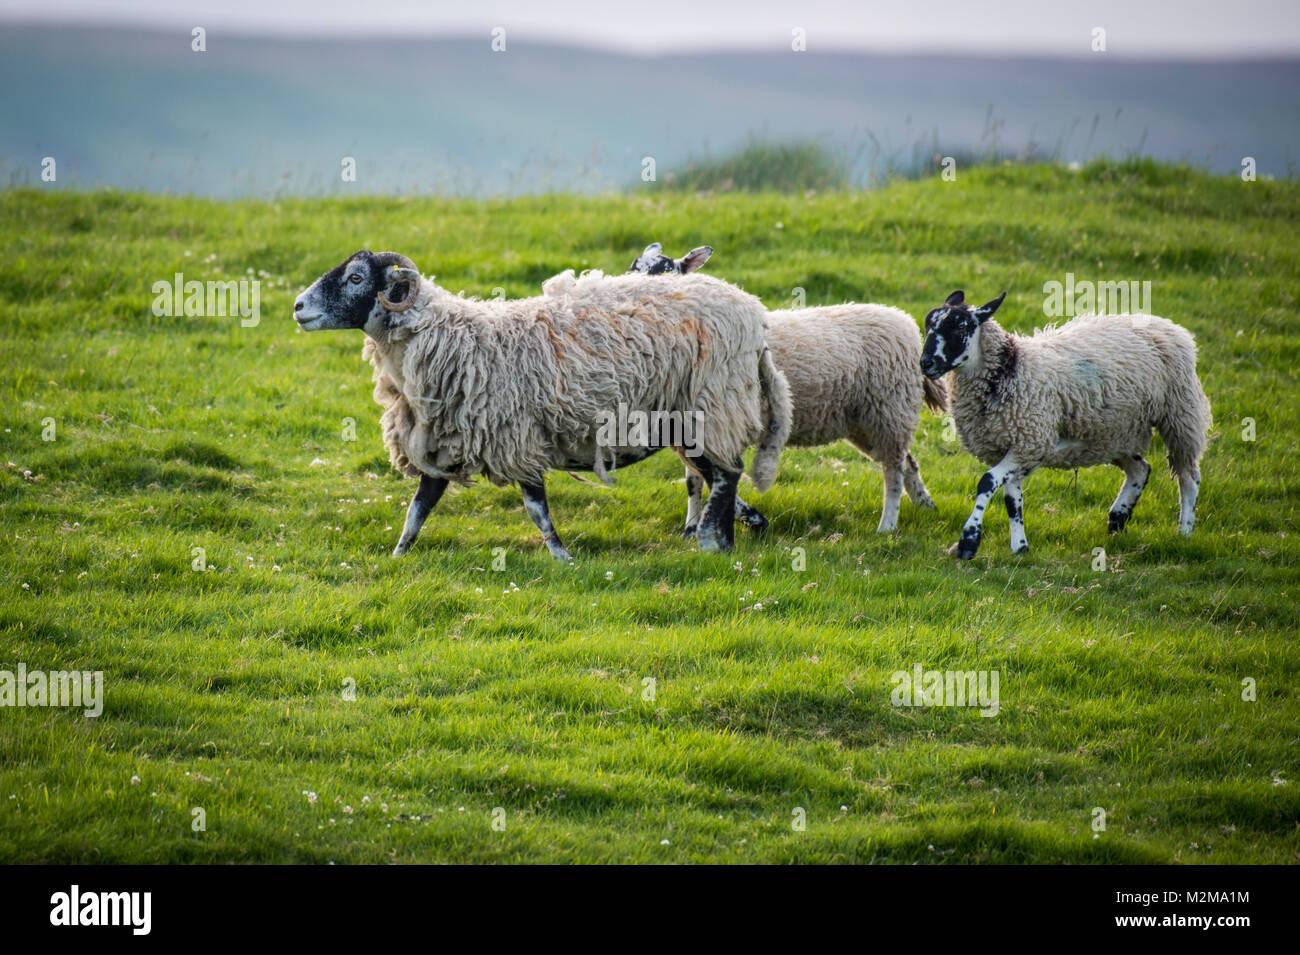 Flock of sheep stand together in pasture, Yorkshire Dales, UK Stock Photo